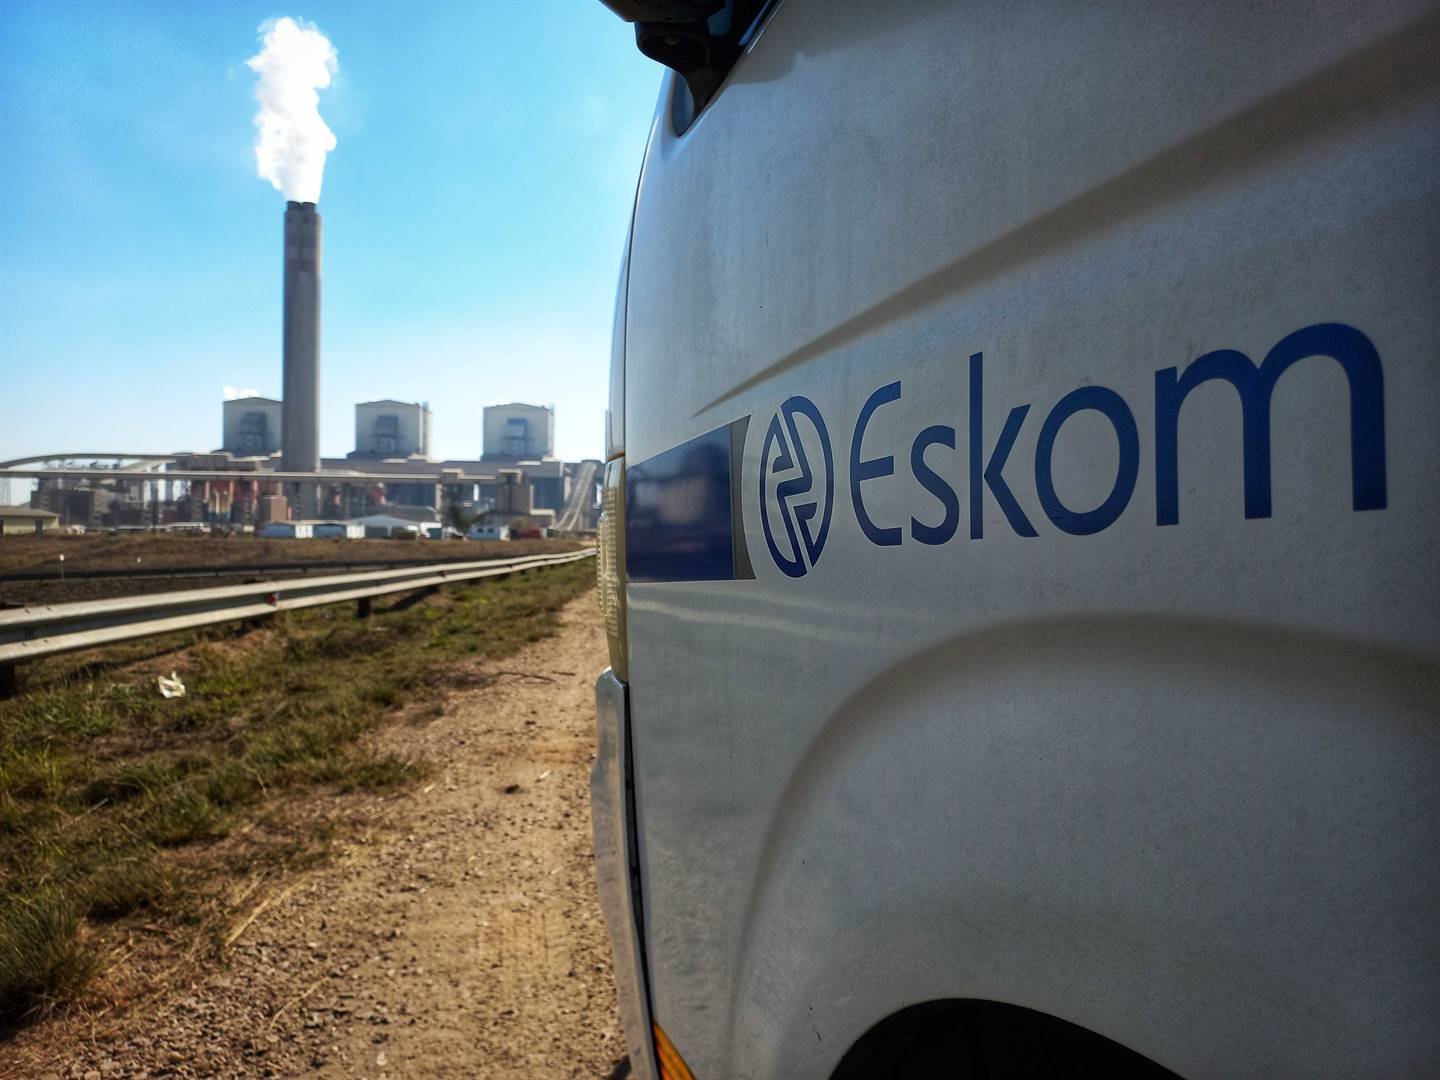 The man posed as an Eskom contractor in the Eastern Cape. (Netwerk24/William Horne)